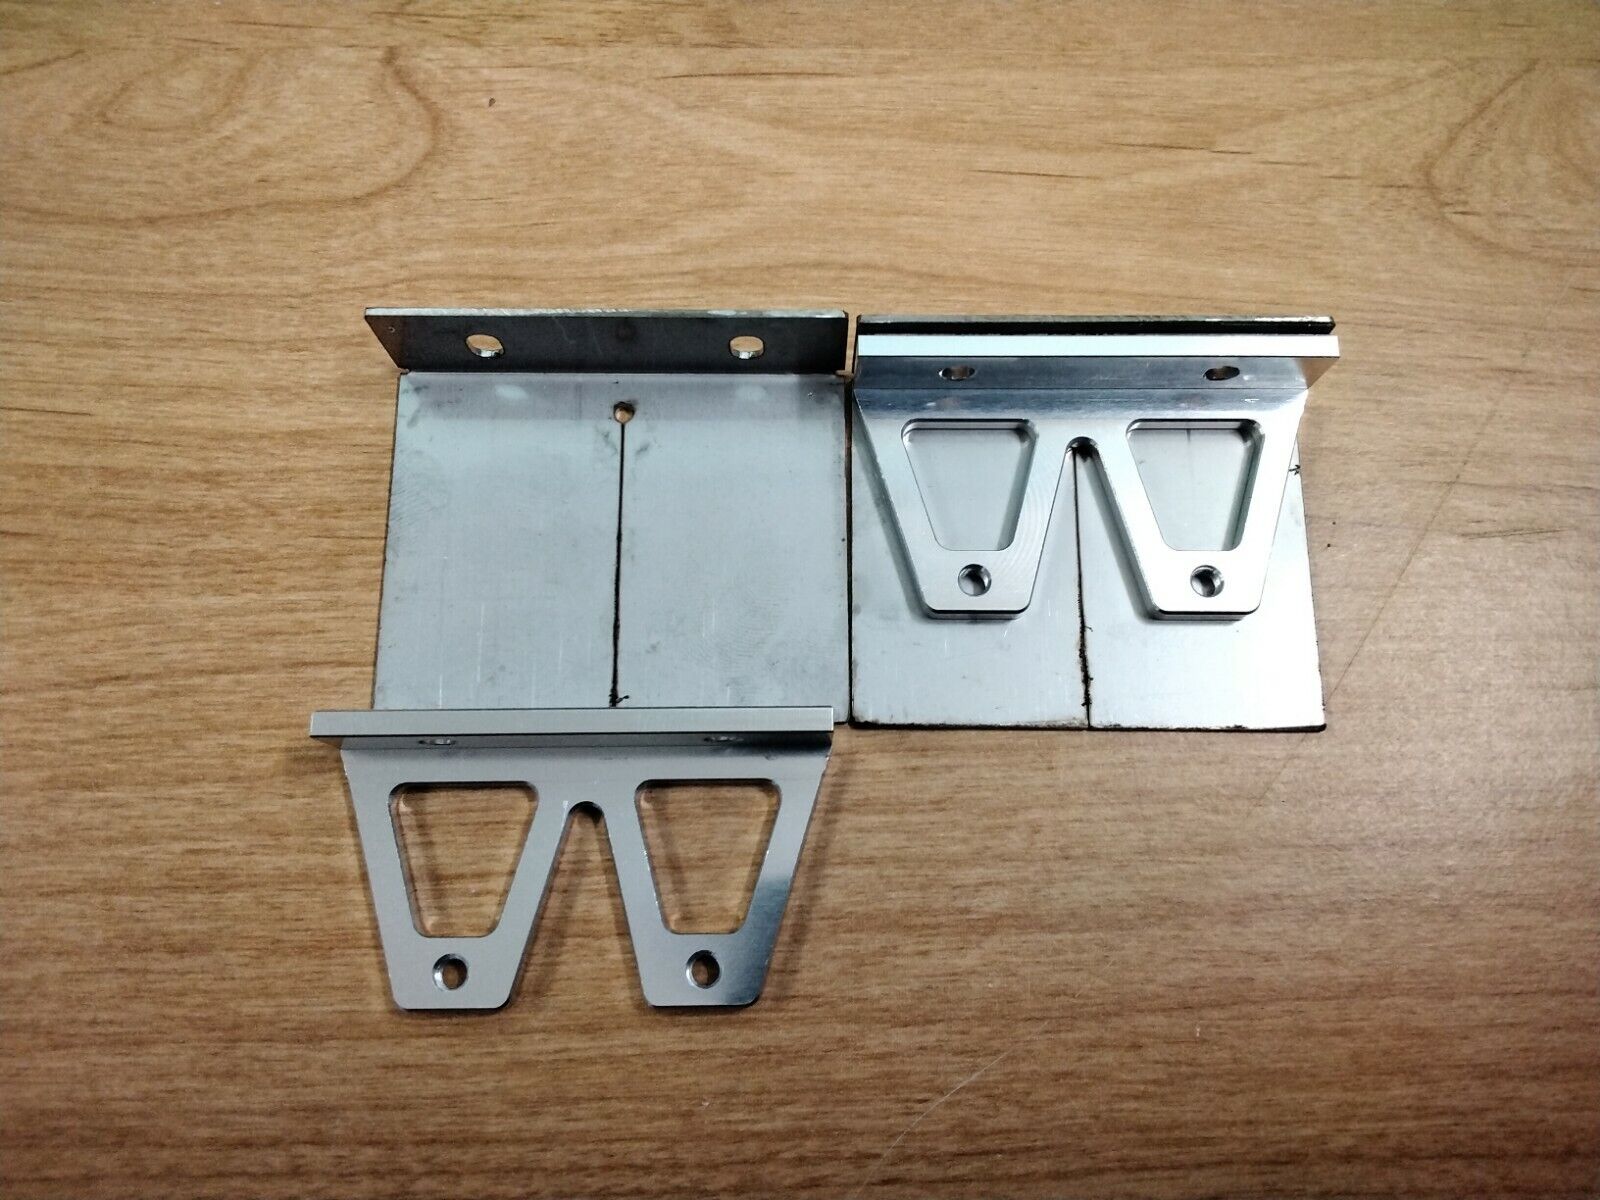 DUAL TRIM TABS Directly managed store for medium size Many popular brands RC Boat 2 TFL ship Pursuit Ariane